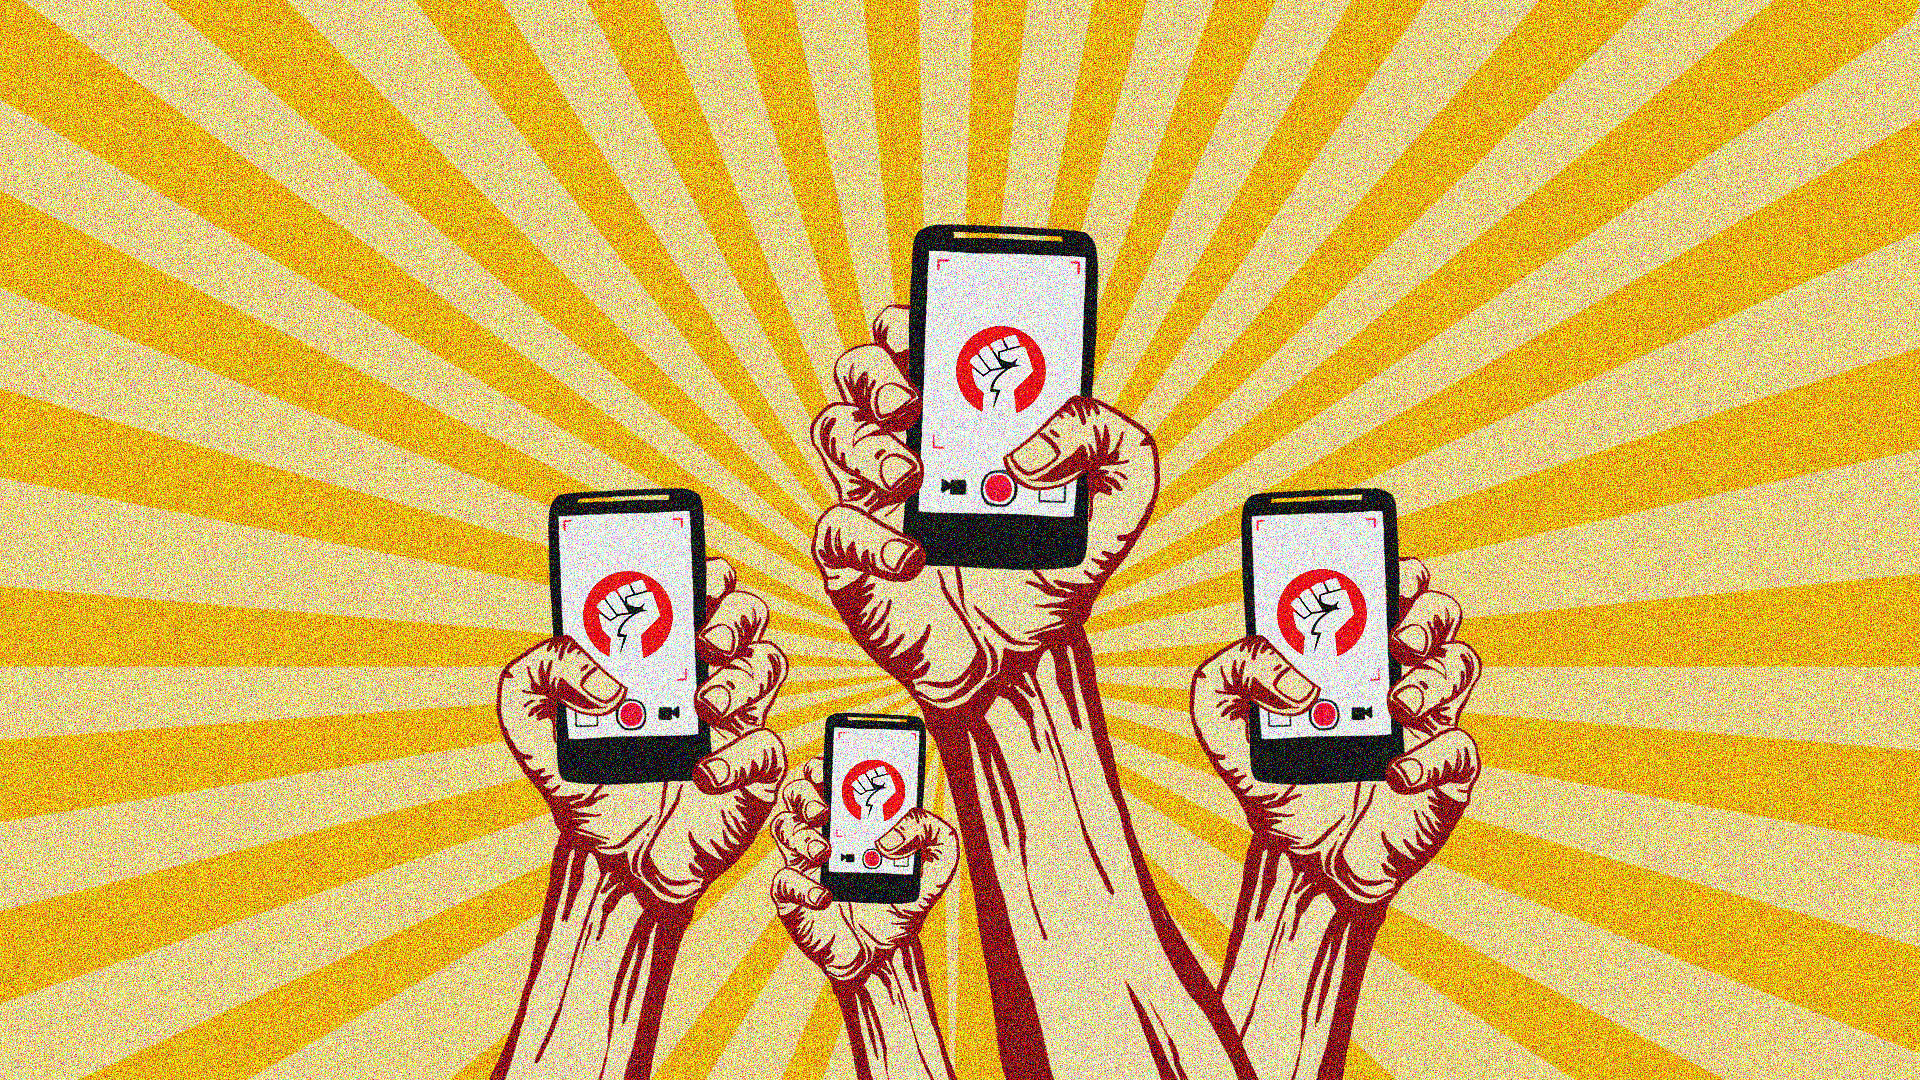 Cellphone videos have become a whole new form of labour protest. (Illustration: Susnata Paul/<b>The Quint</b>